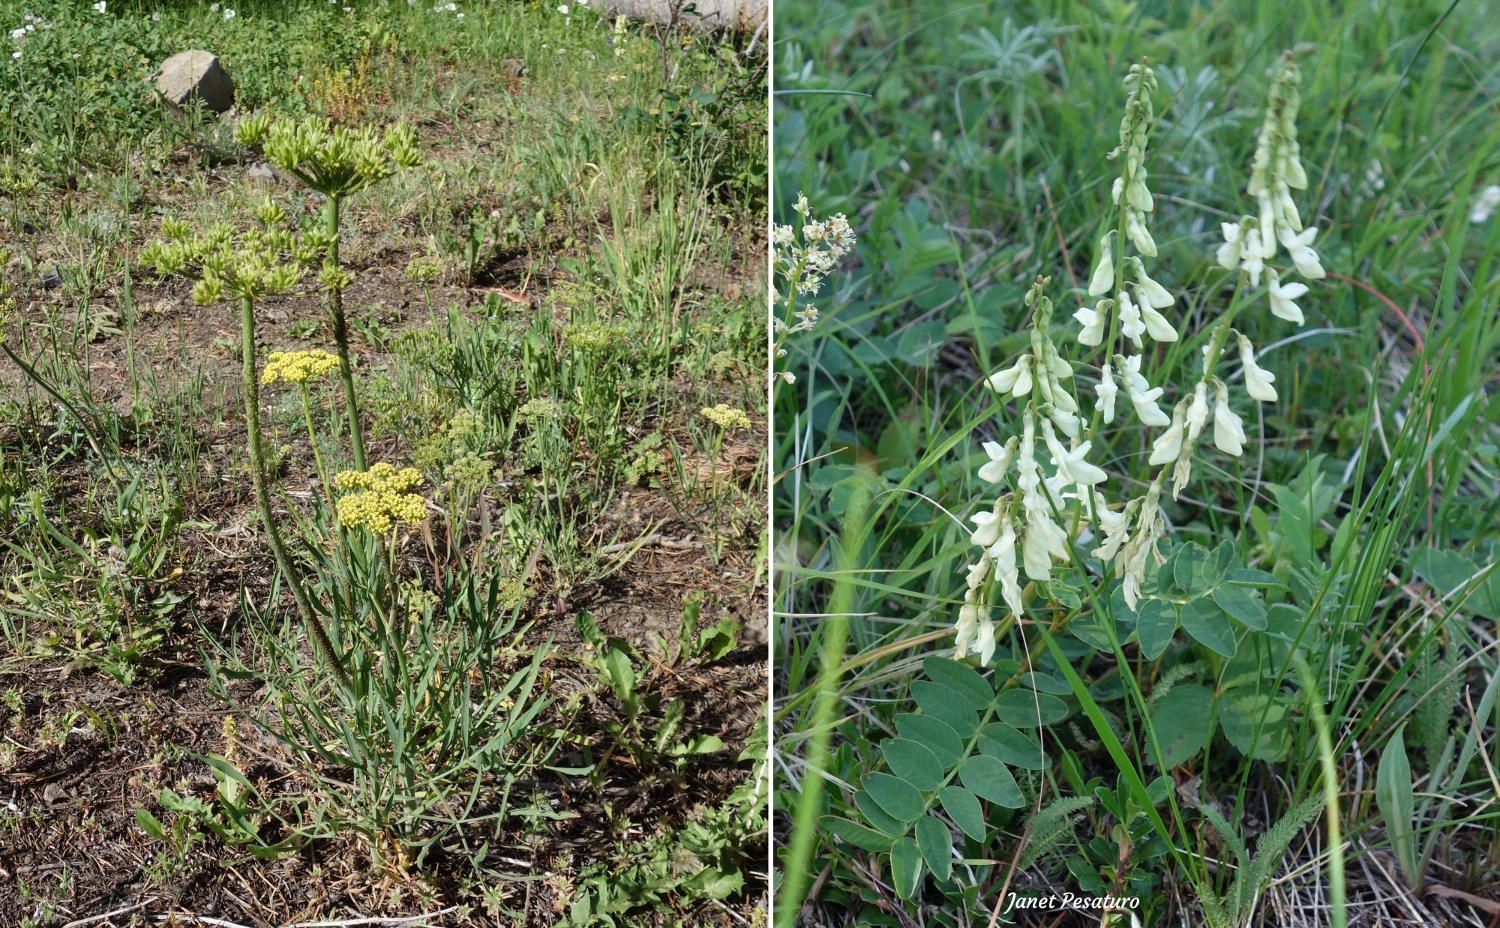 Nineleaf biscuitroot and yellow sweetvetch at a grizzly bear foraging area in Montana